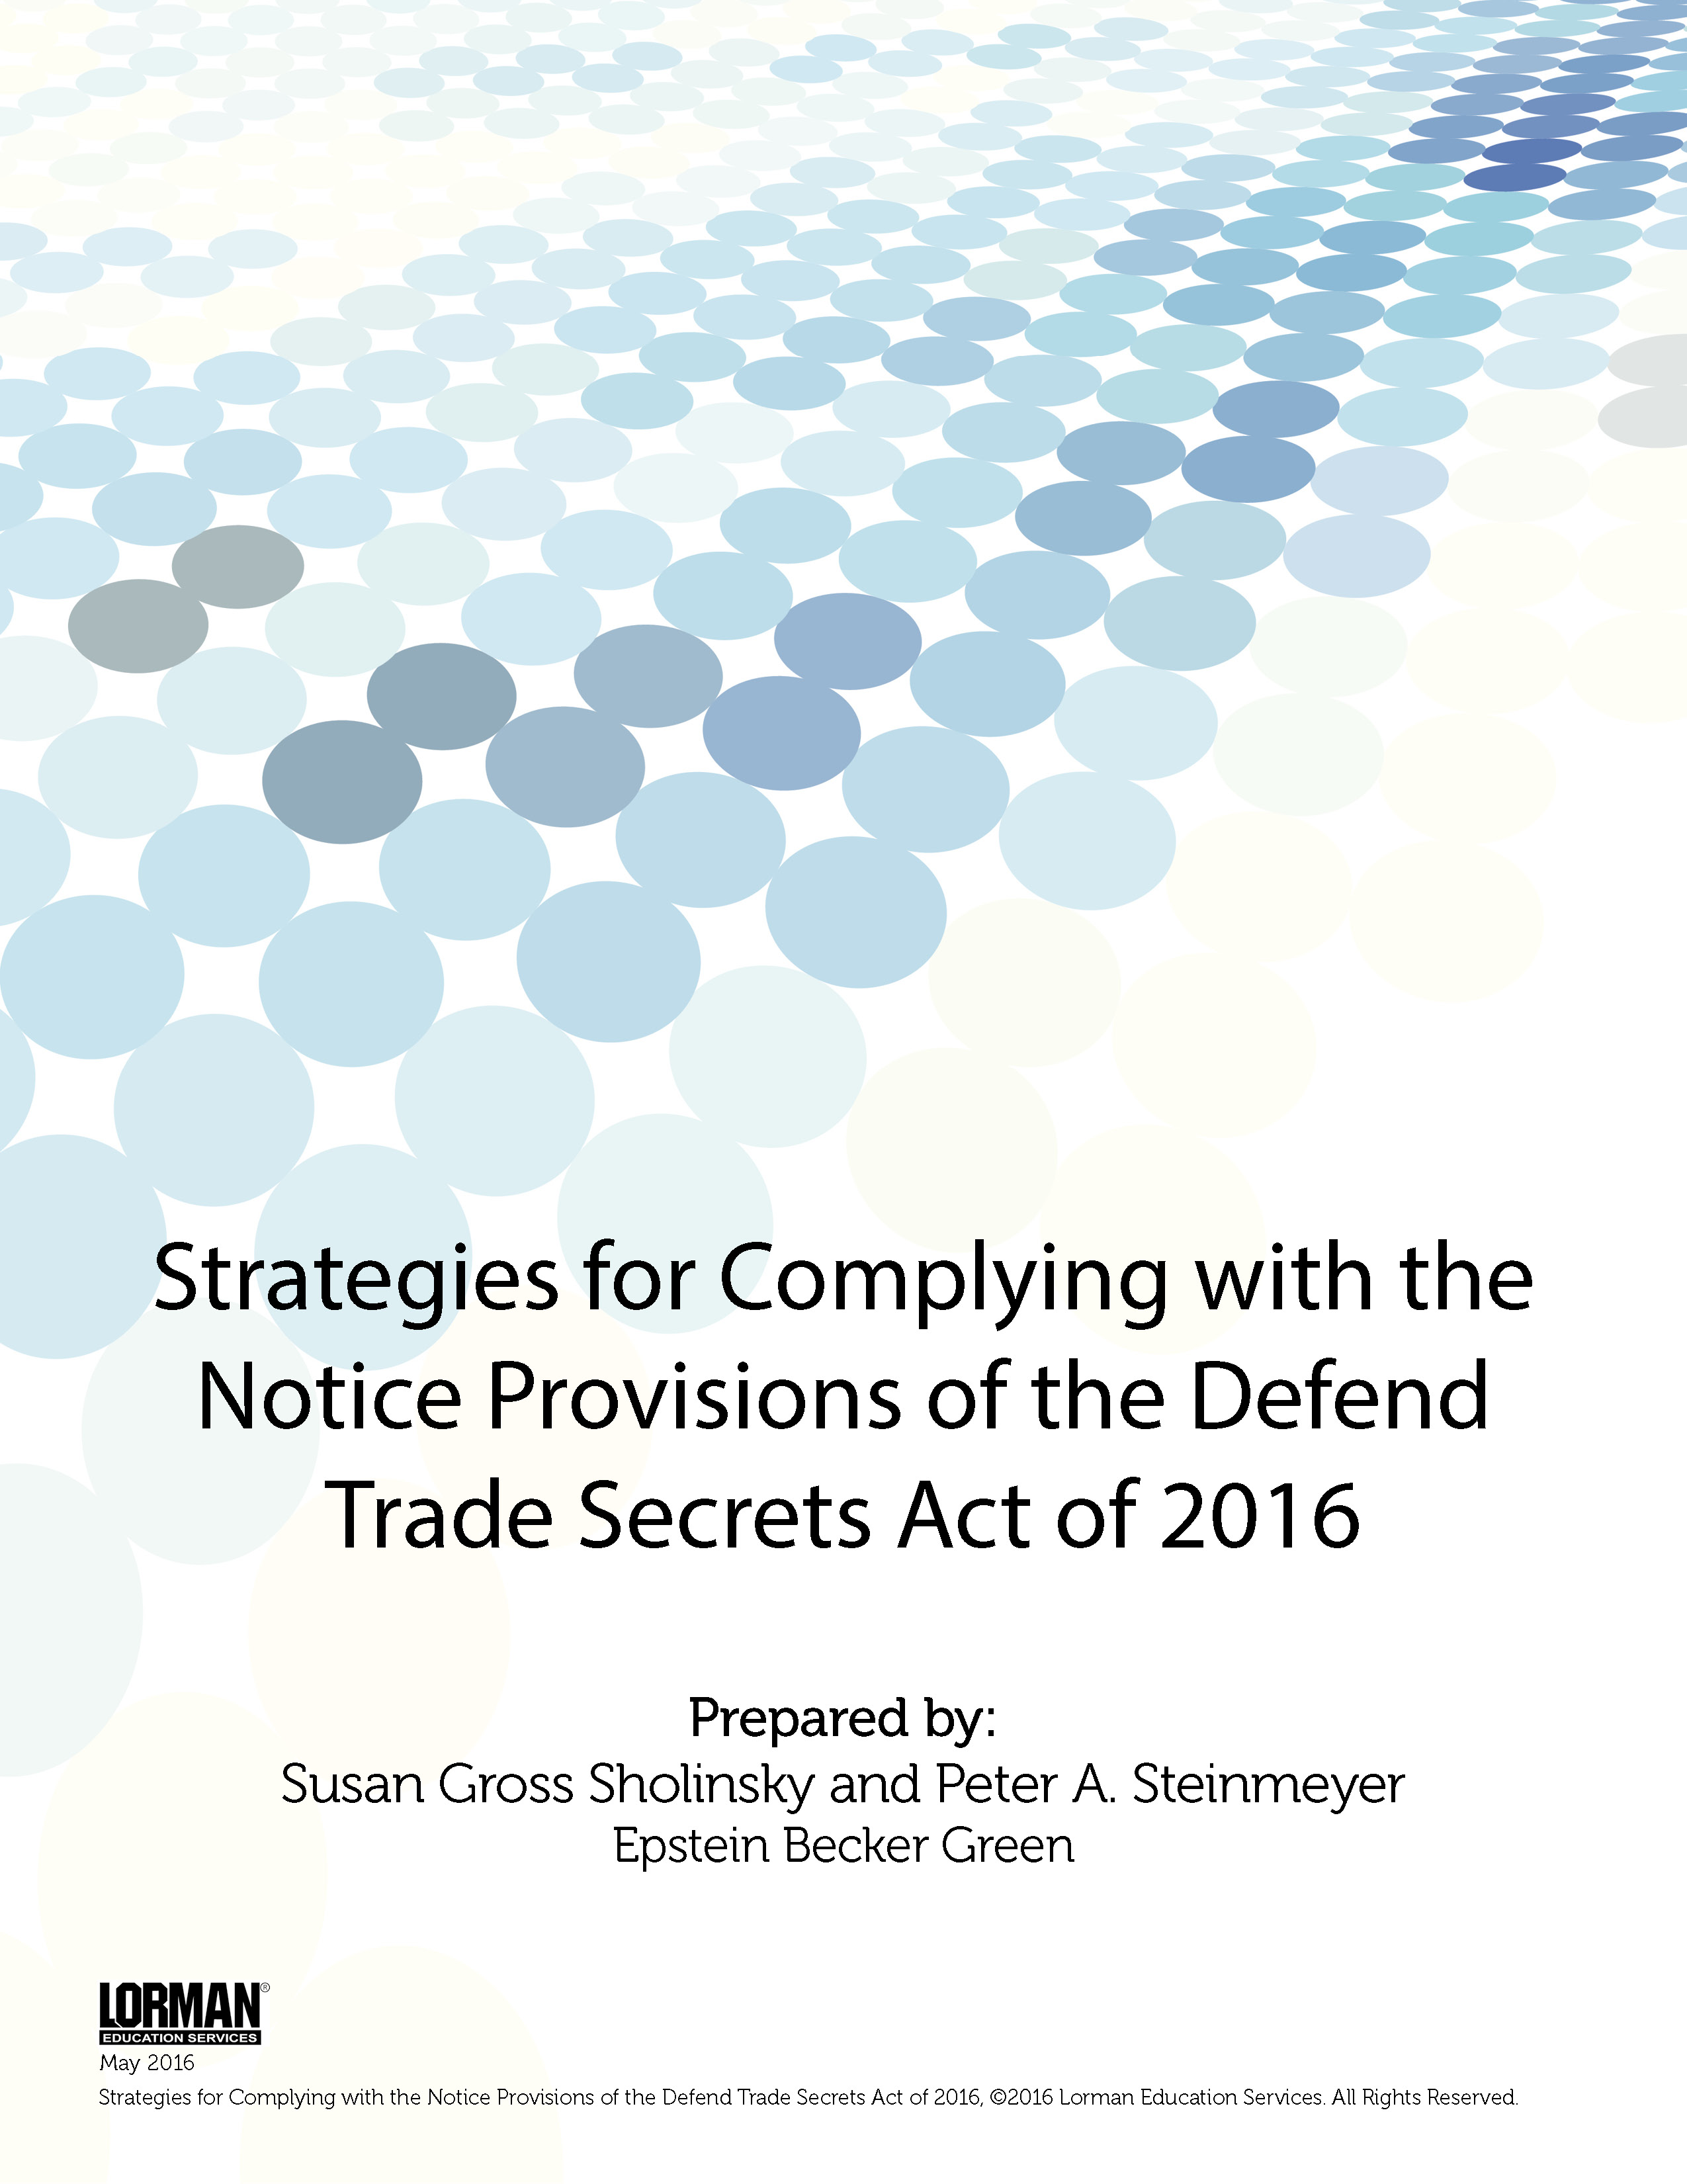 Strategies for Complying with the Notice Provisions of the Defend Trade Secrets Act of 2016